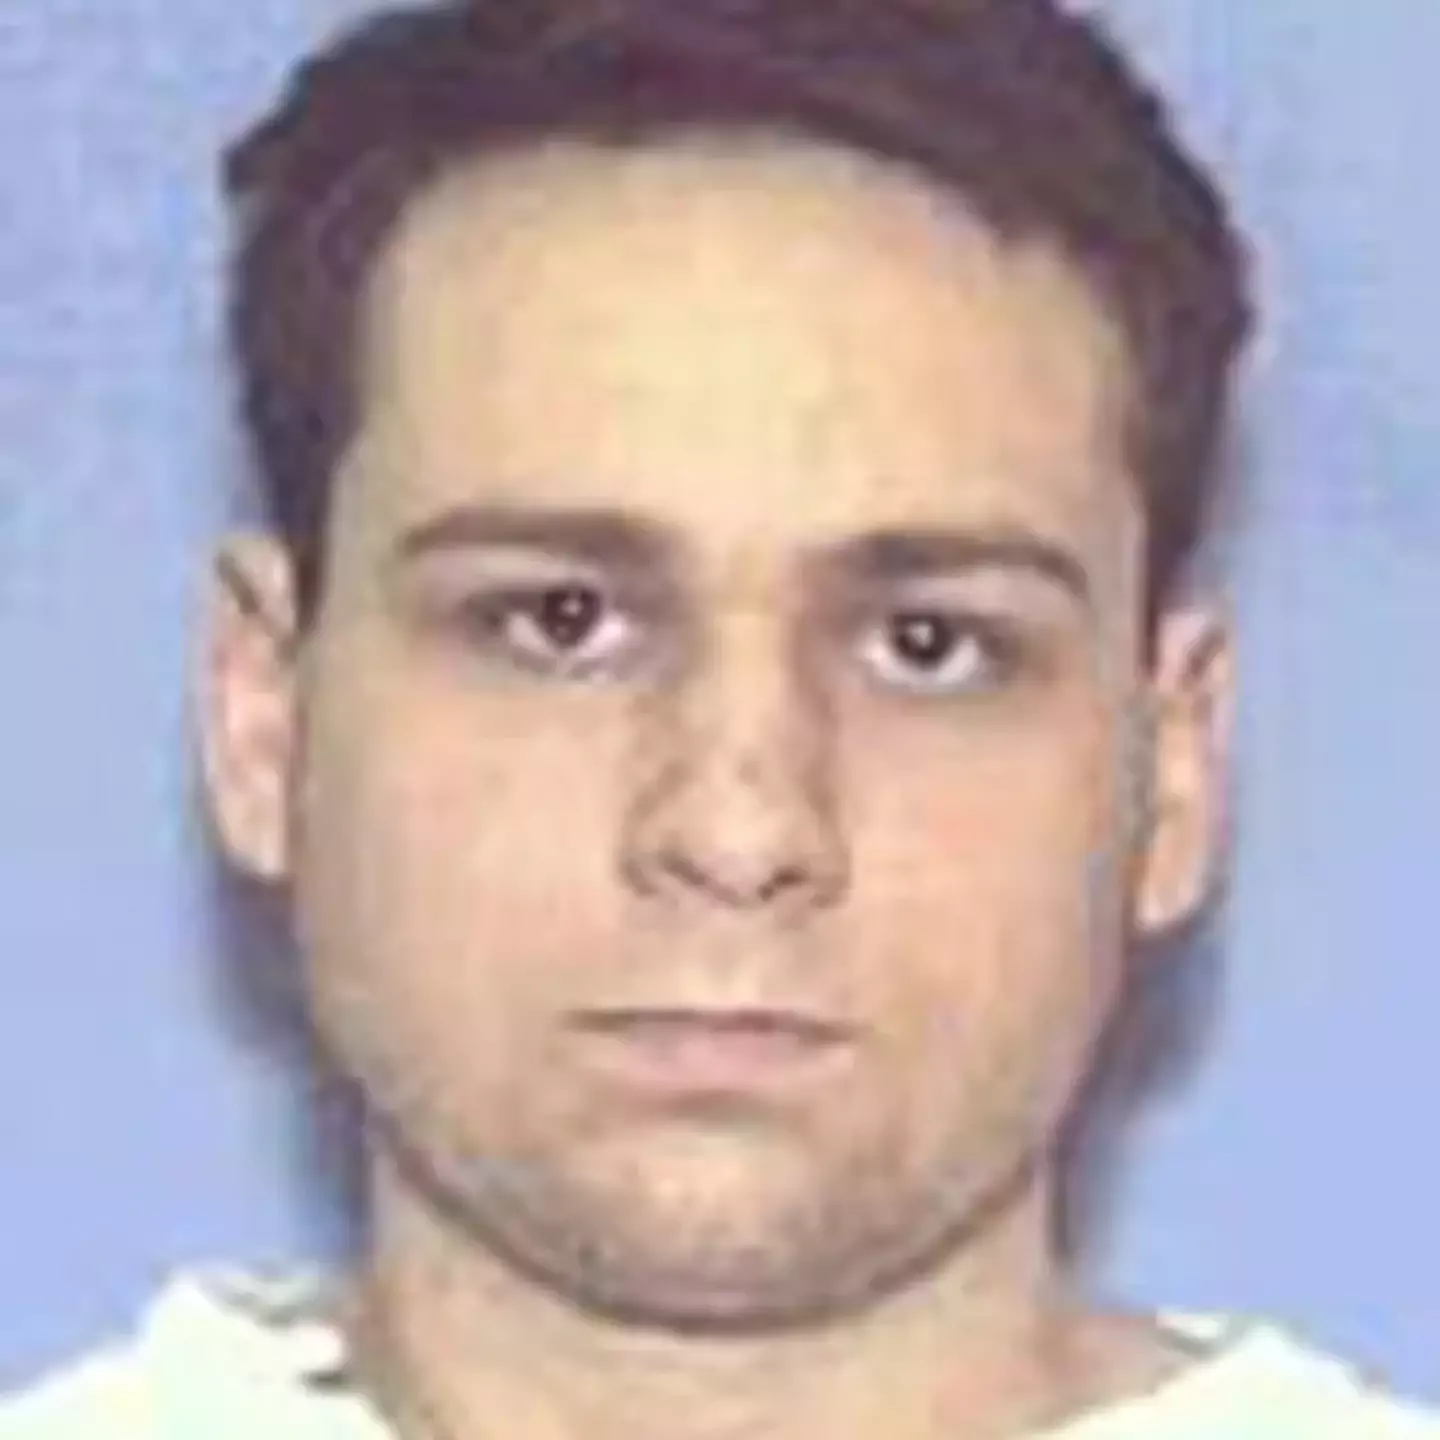 John King was executed for the murder of James Byrd.